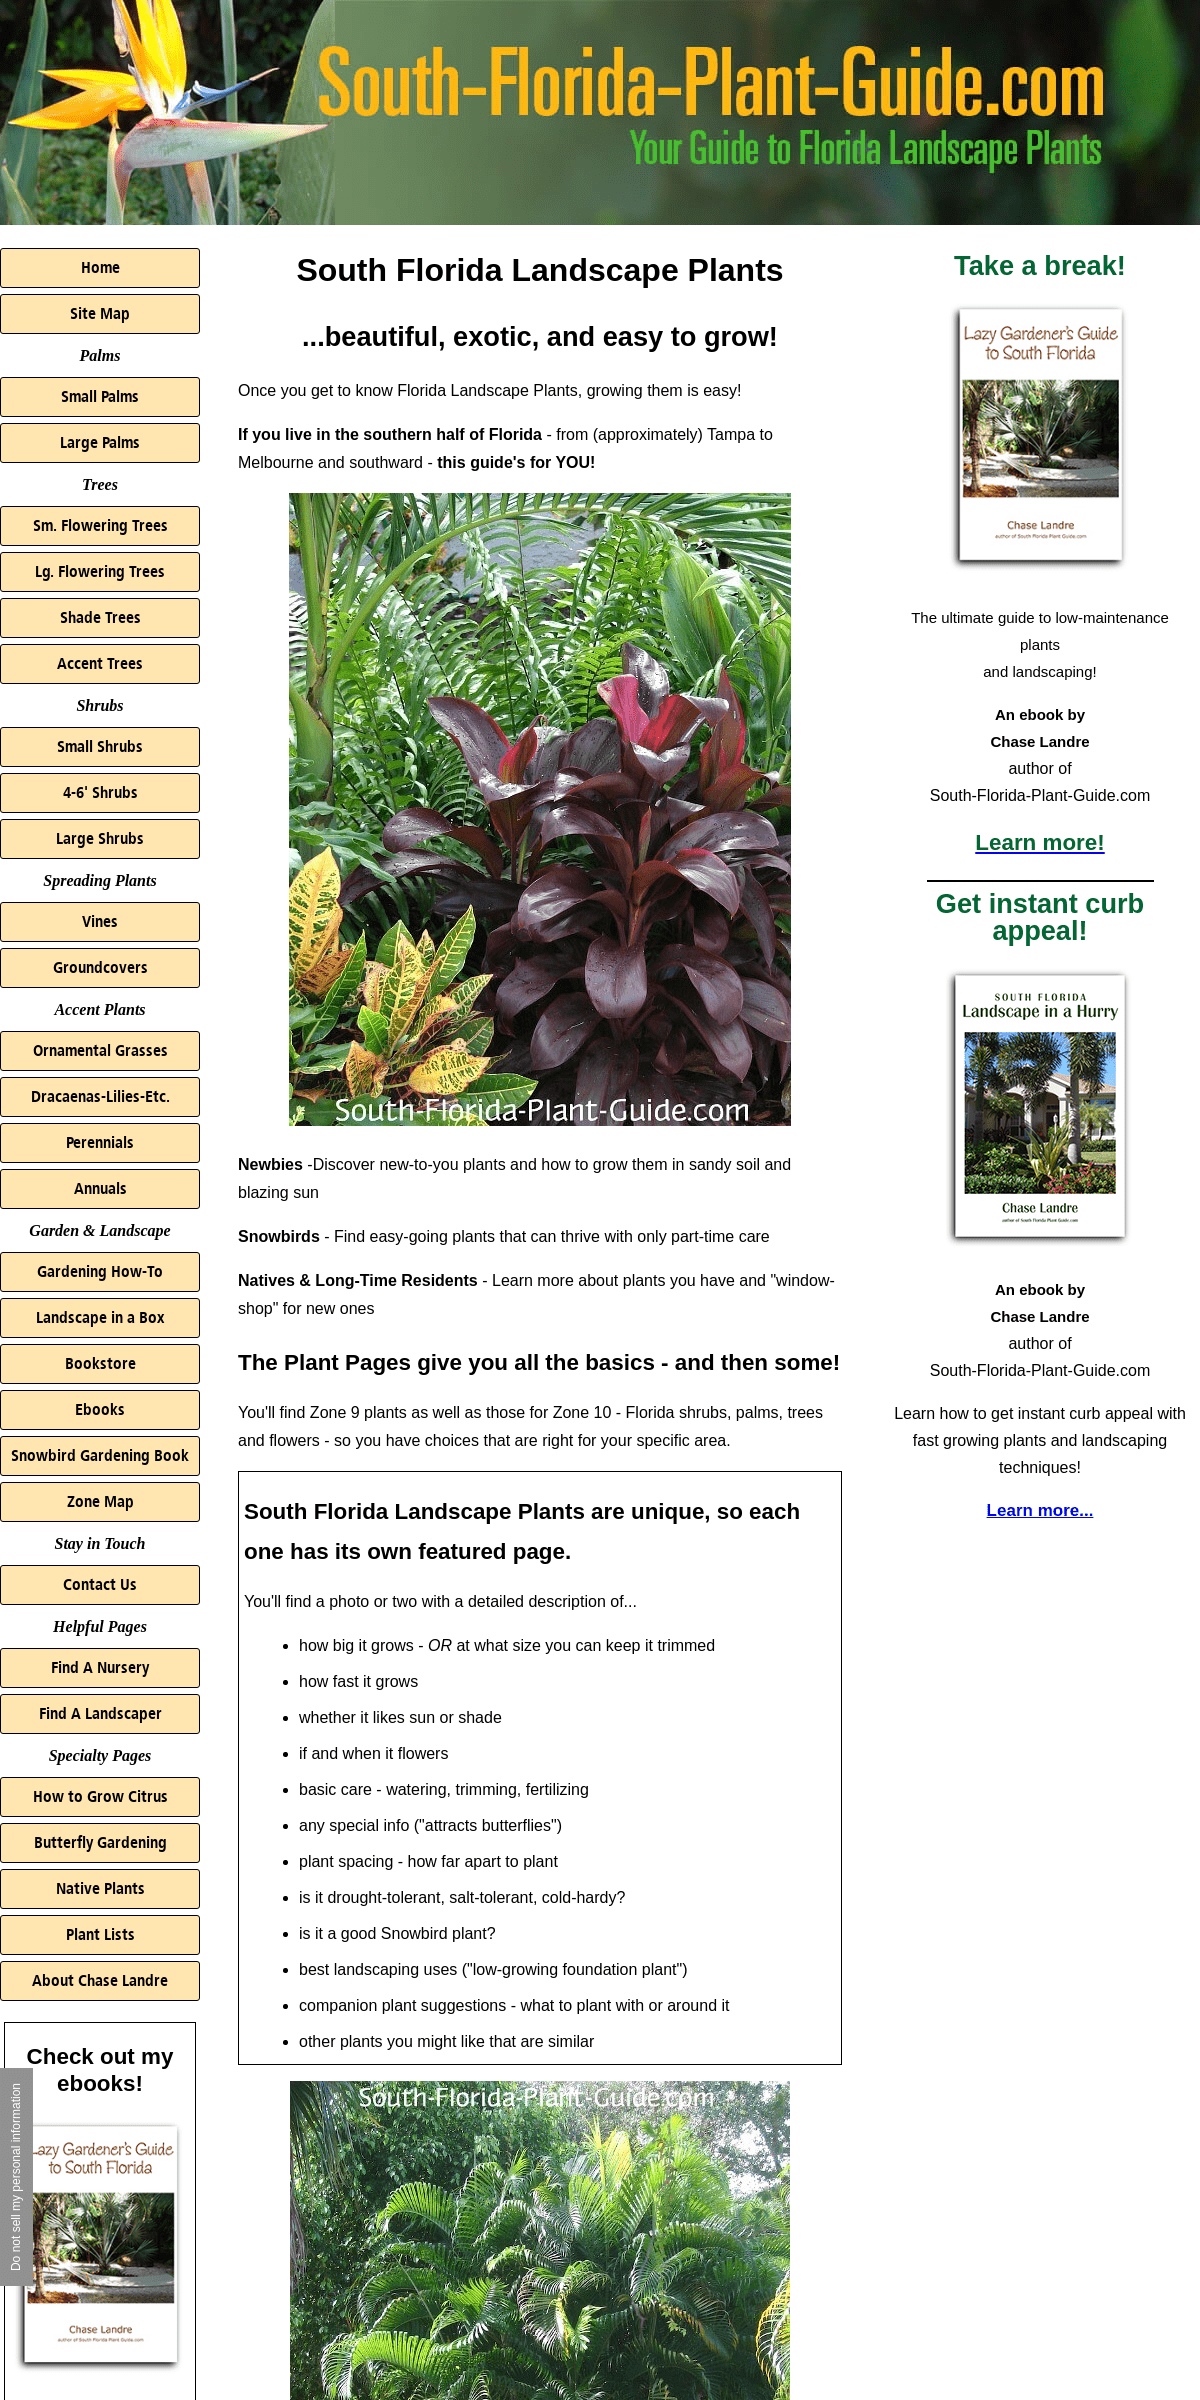 A complete backup of south-florida-plant-guide.com